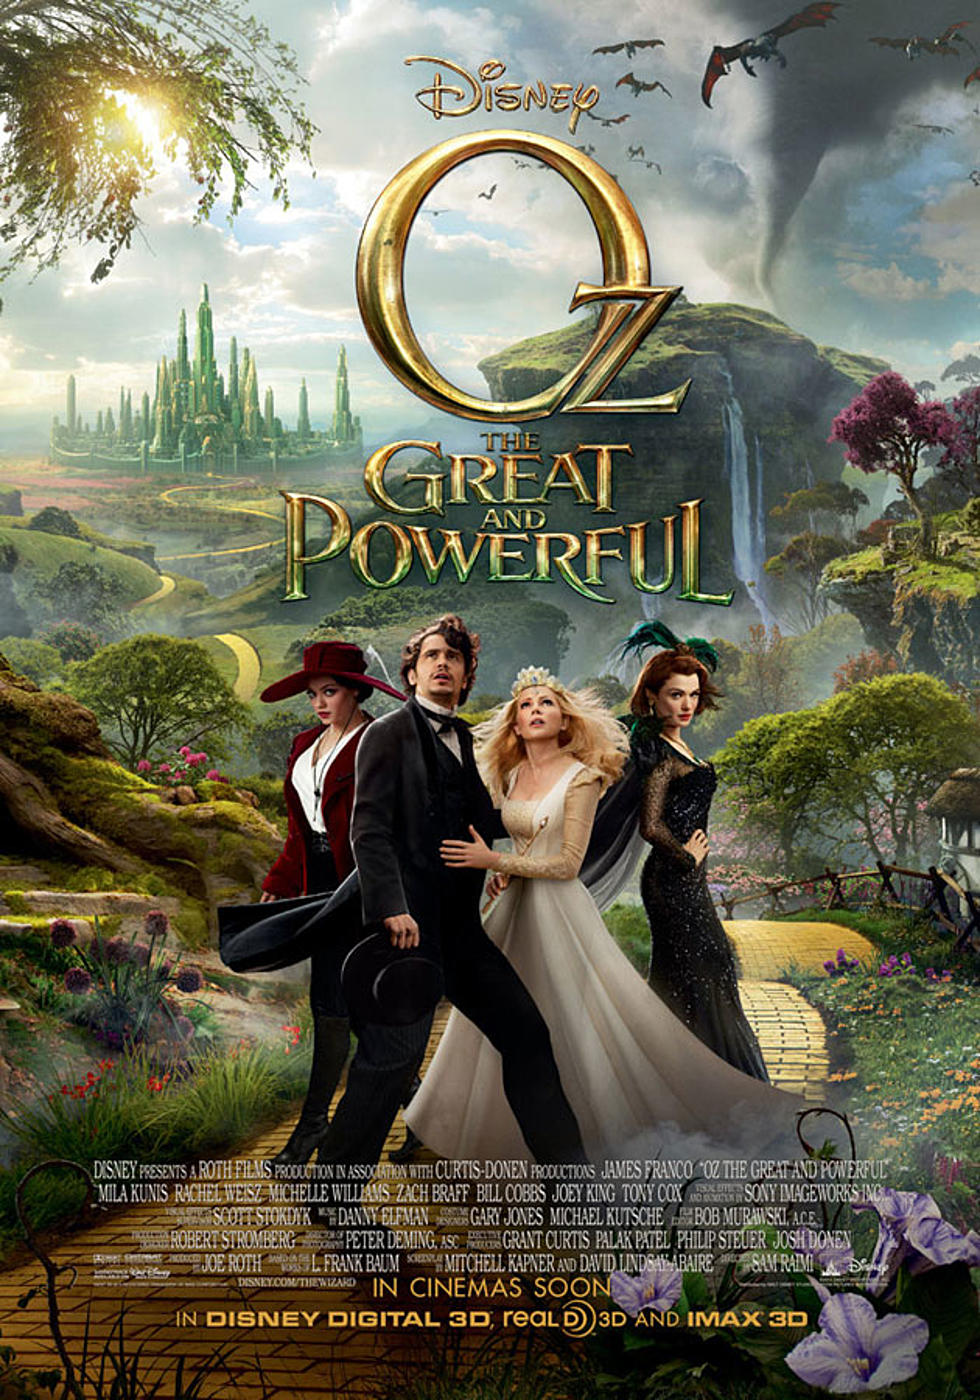 ‘Oz: The Great and Powerful’ Releases an Even Newer Poster! The Puzzle Is Now Complete